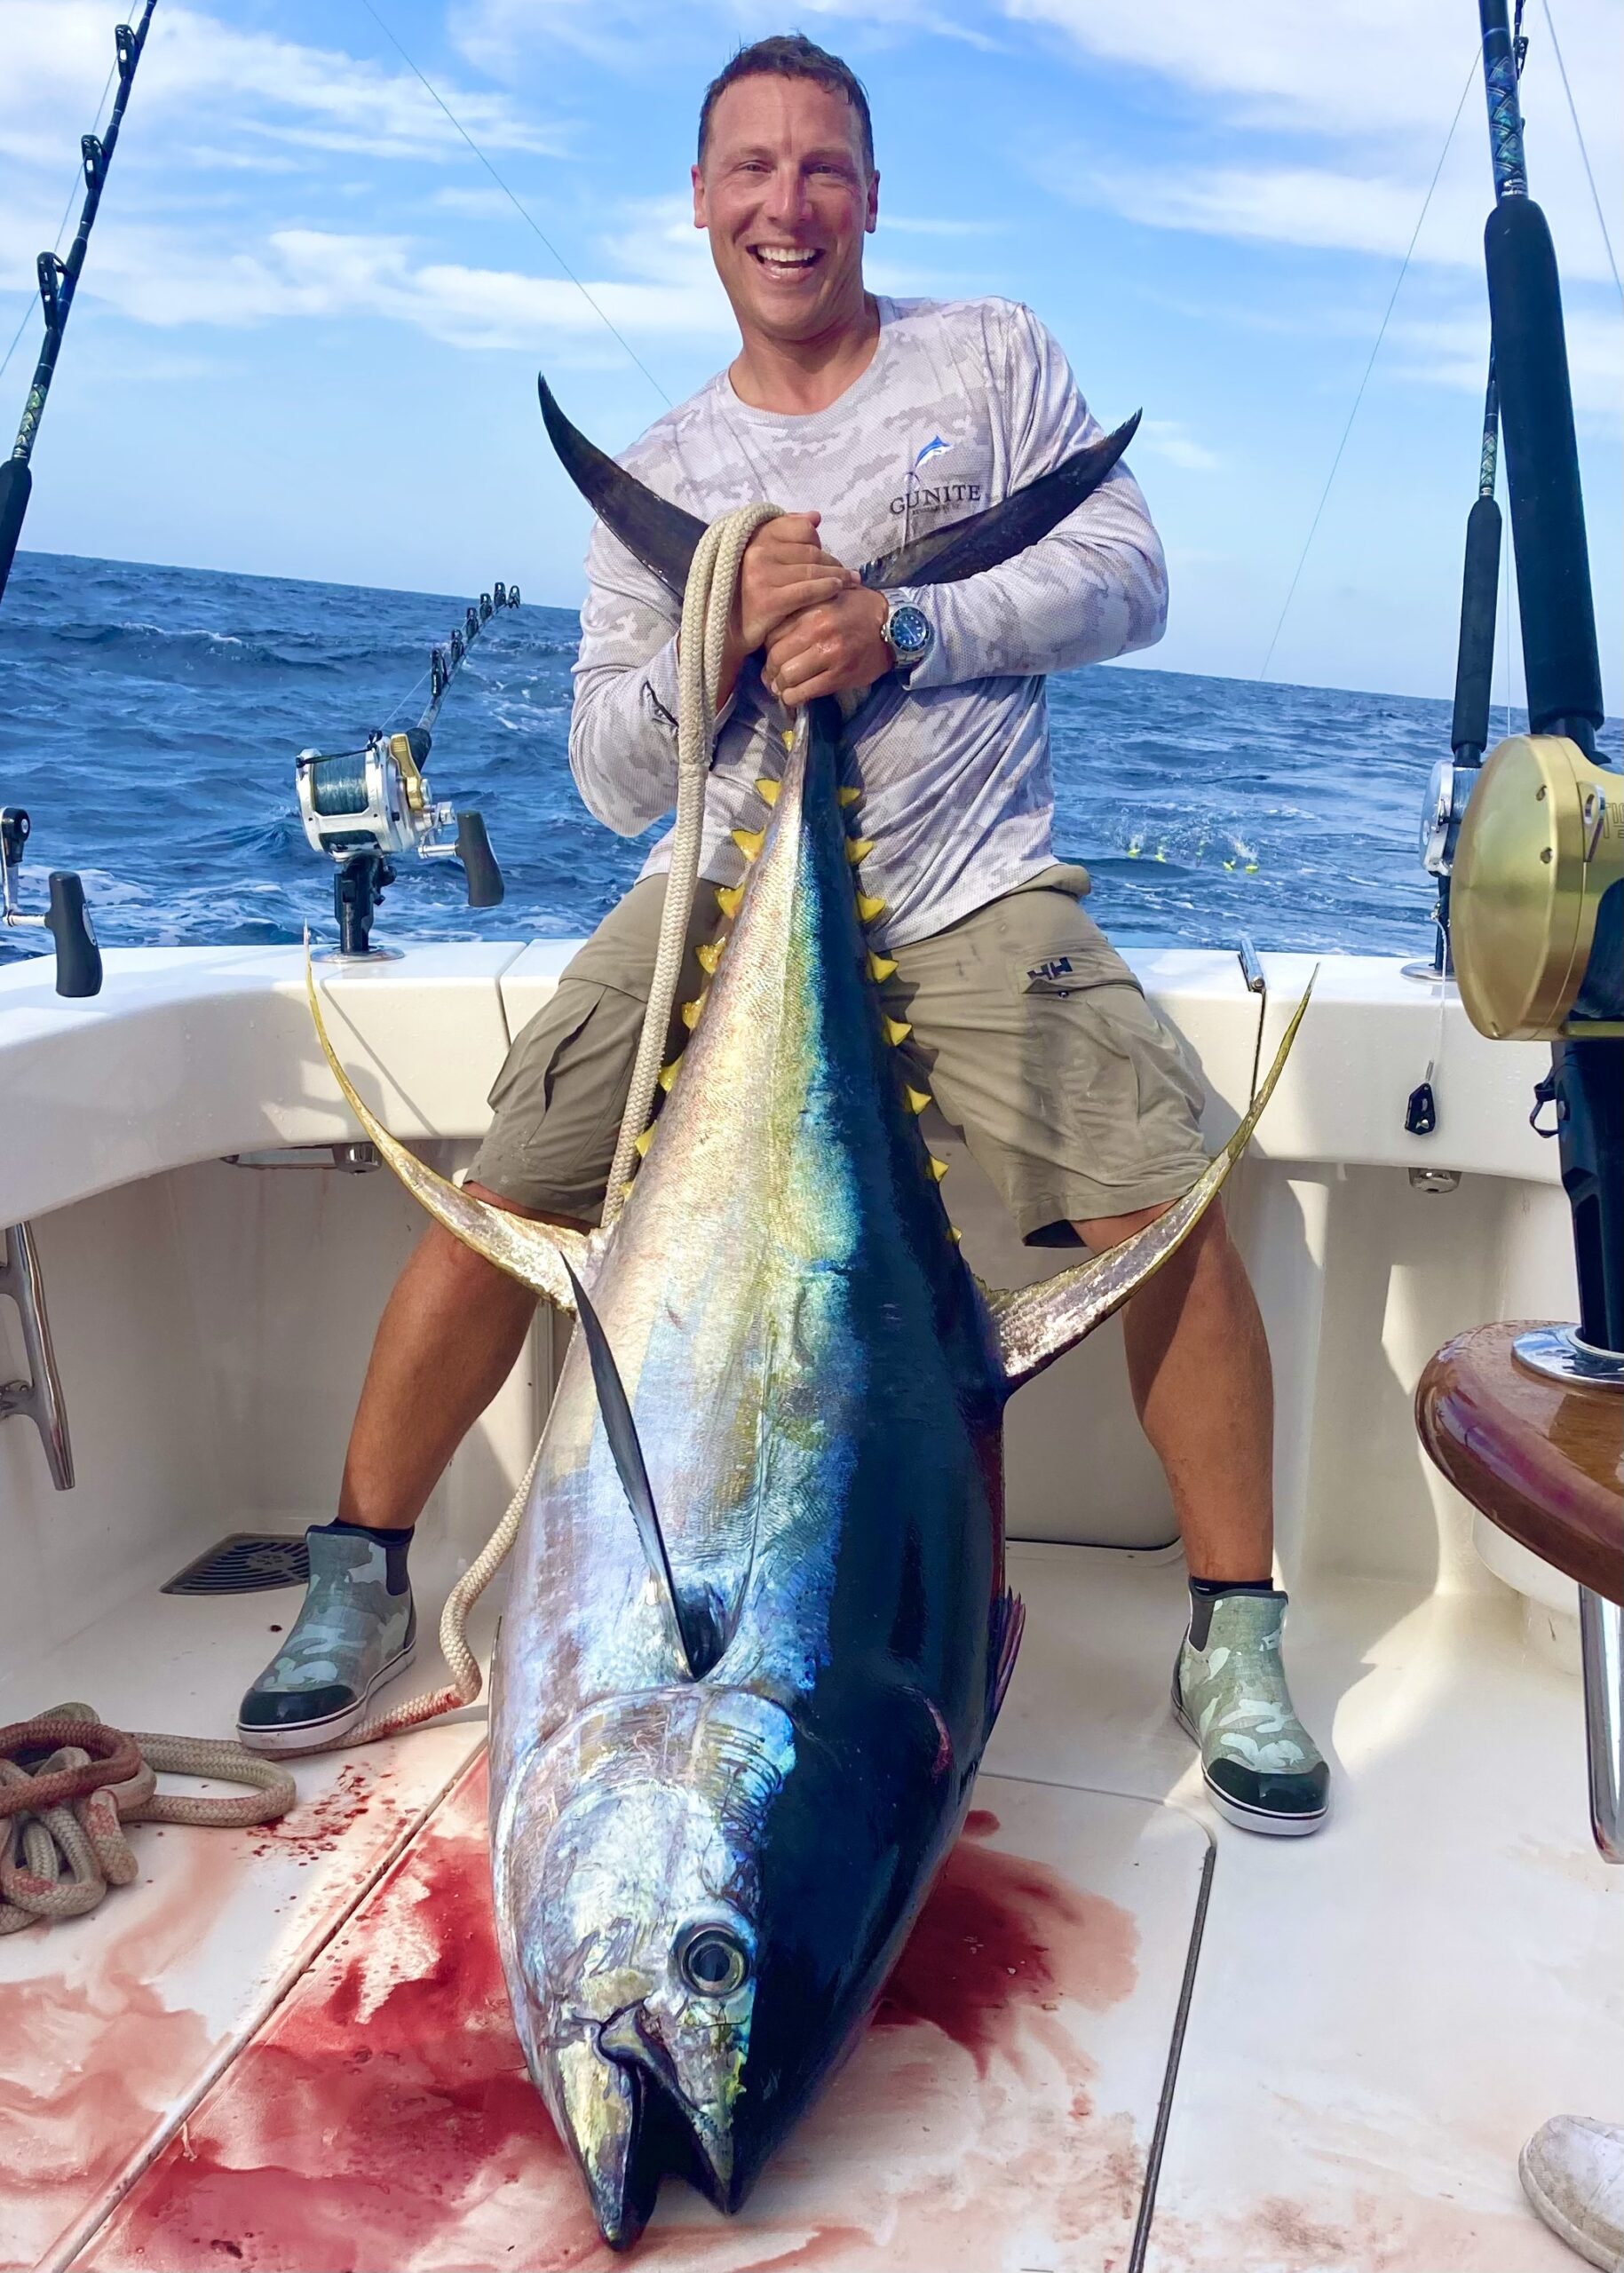 Kevin Norden and his crew caught this rare pelagic trophy, a 180-pound yellowfin tuna, during the Hamptons Offshore Invitational big game fishing tournament last week.